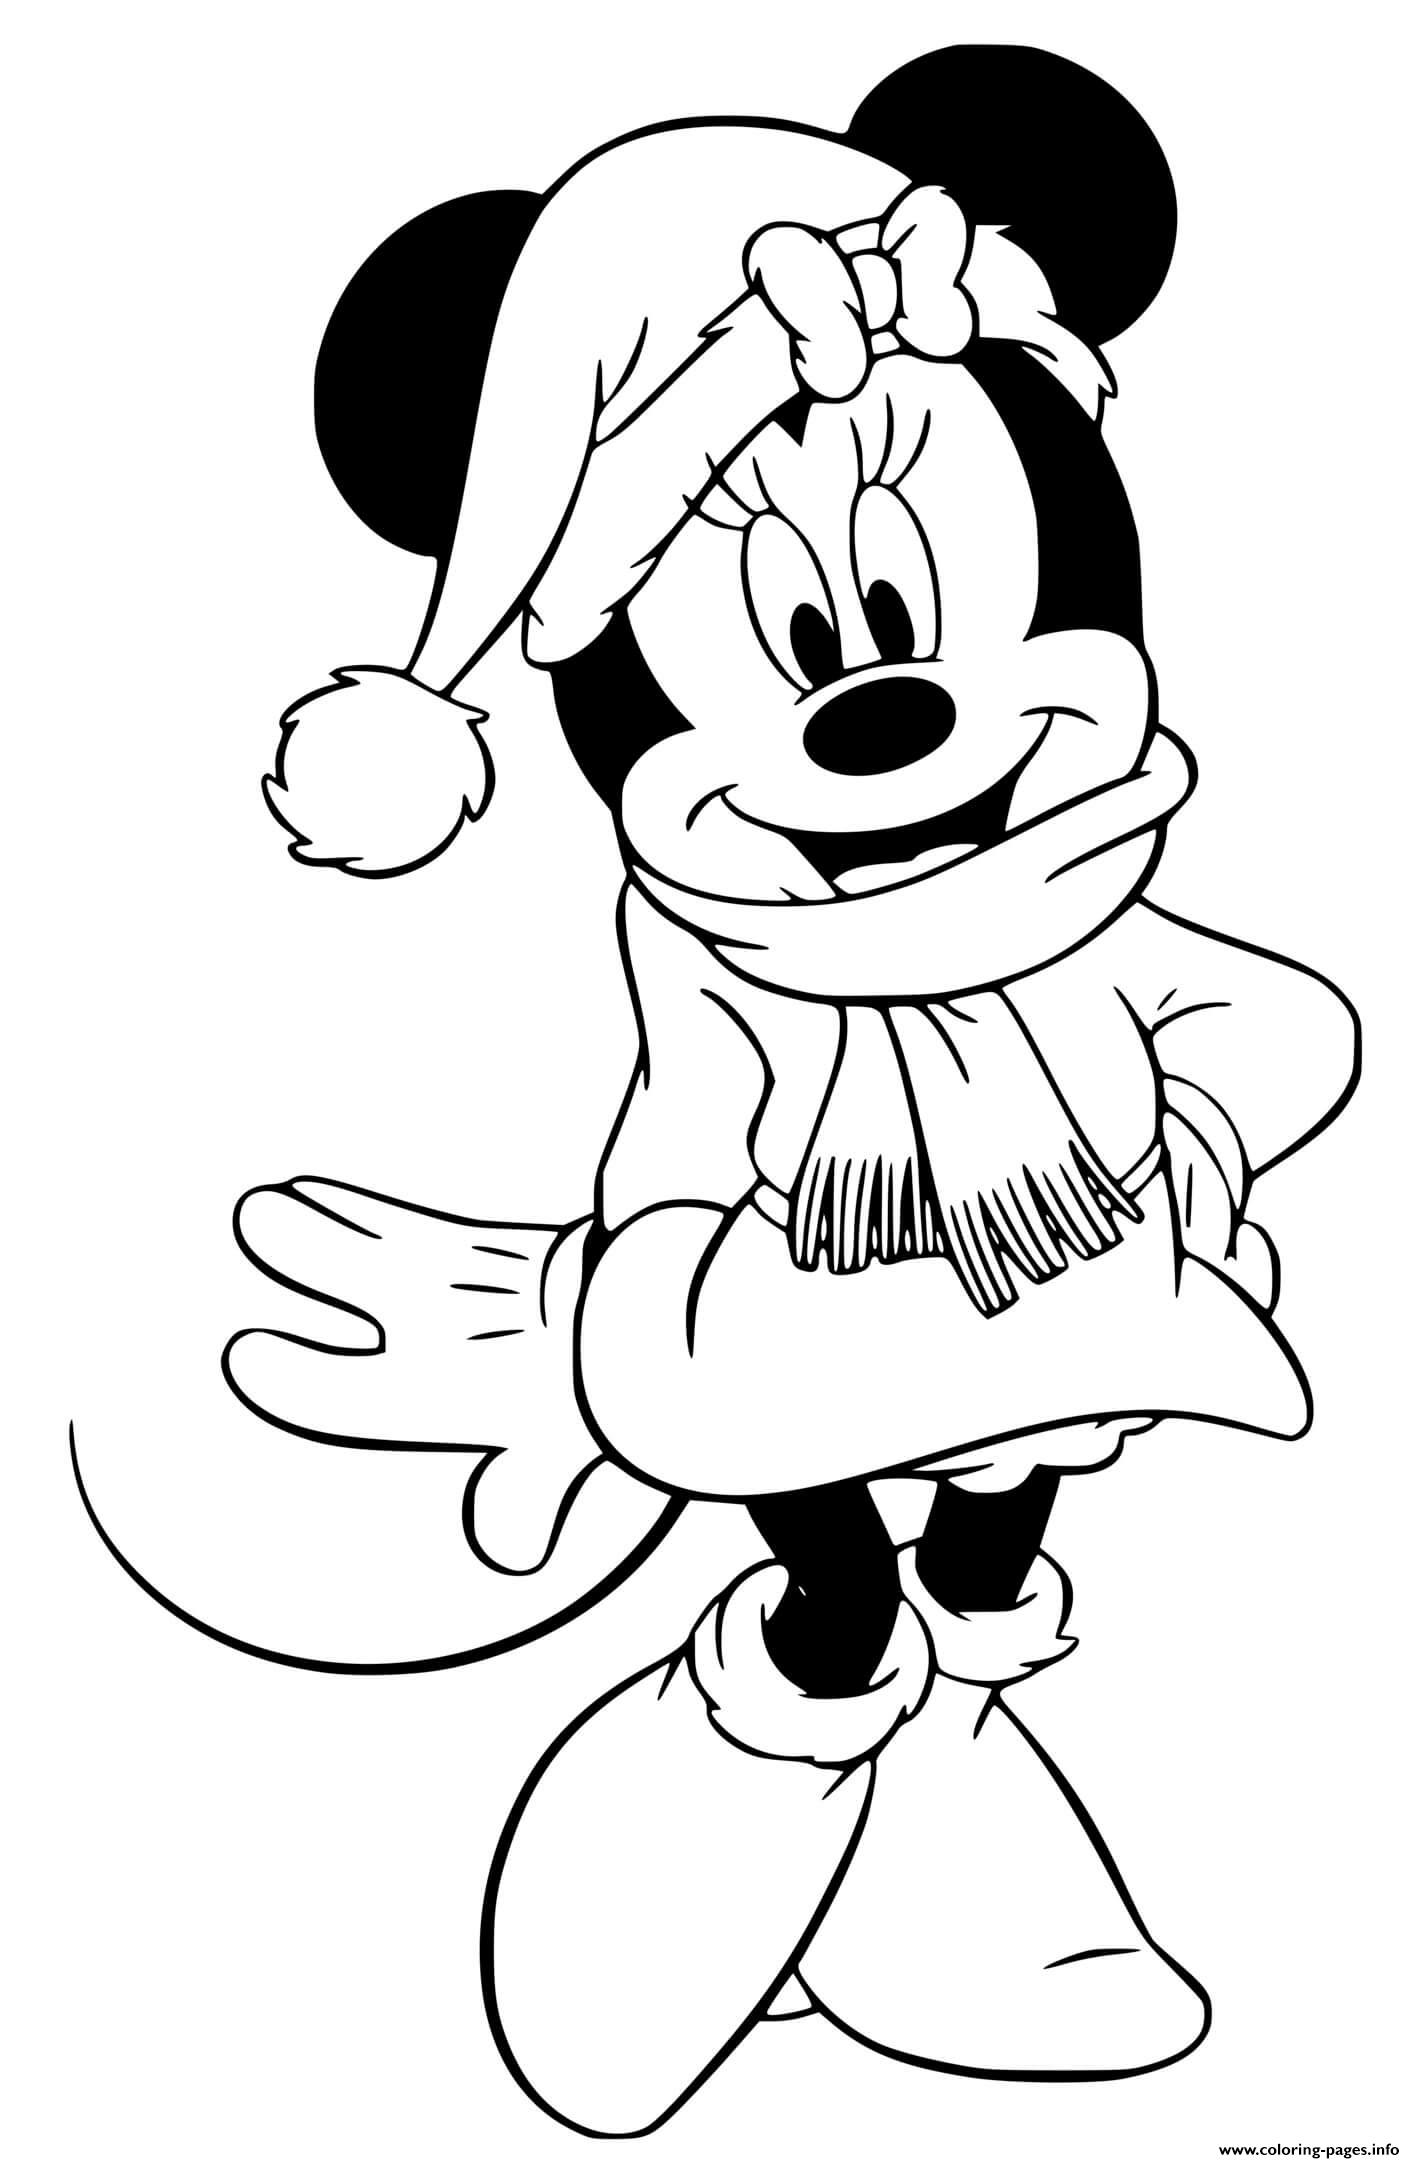 Minnie All Bundled Up coloring